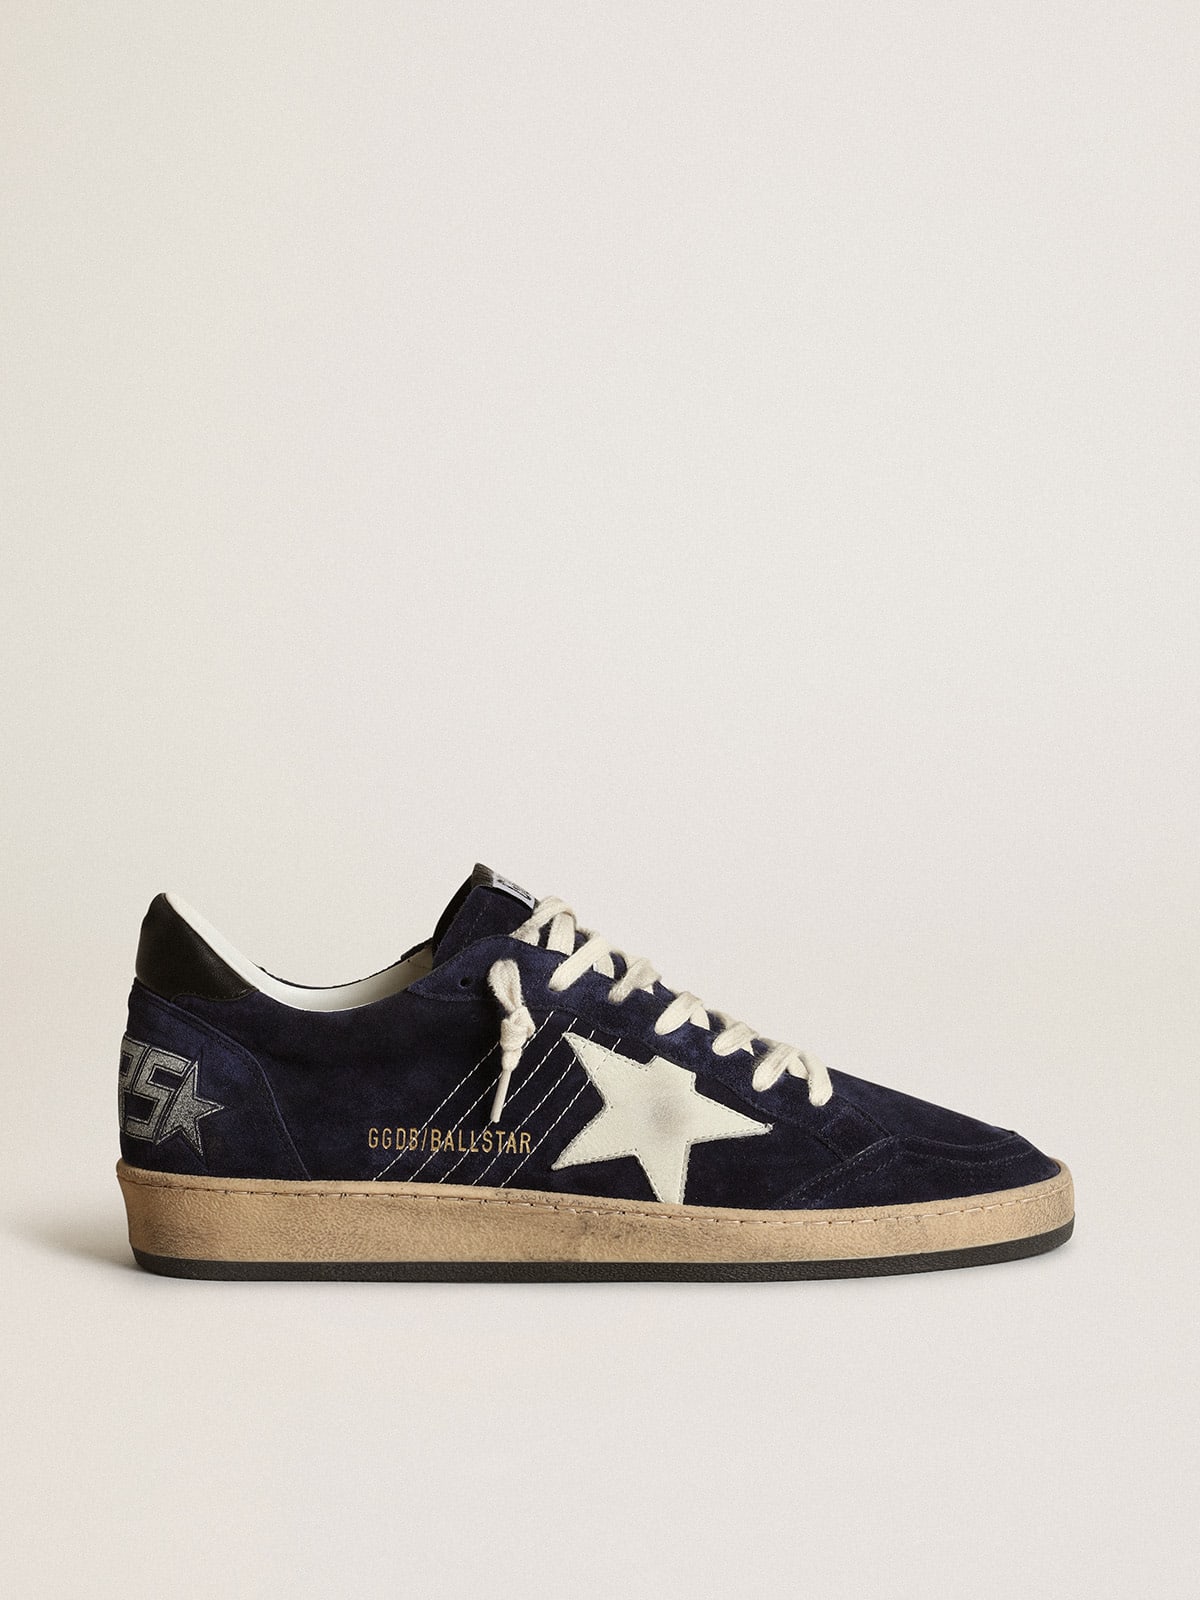 Ball Star sneakers in dark blue suede with off-white nubuck star and black nappa leather heel tab